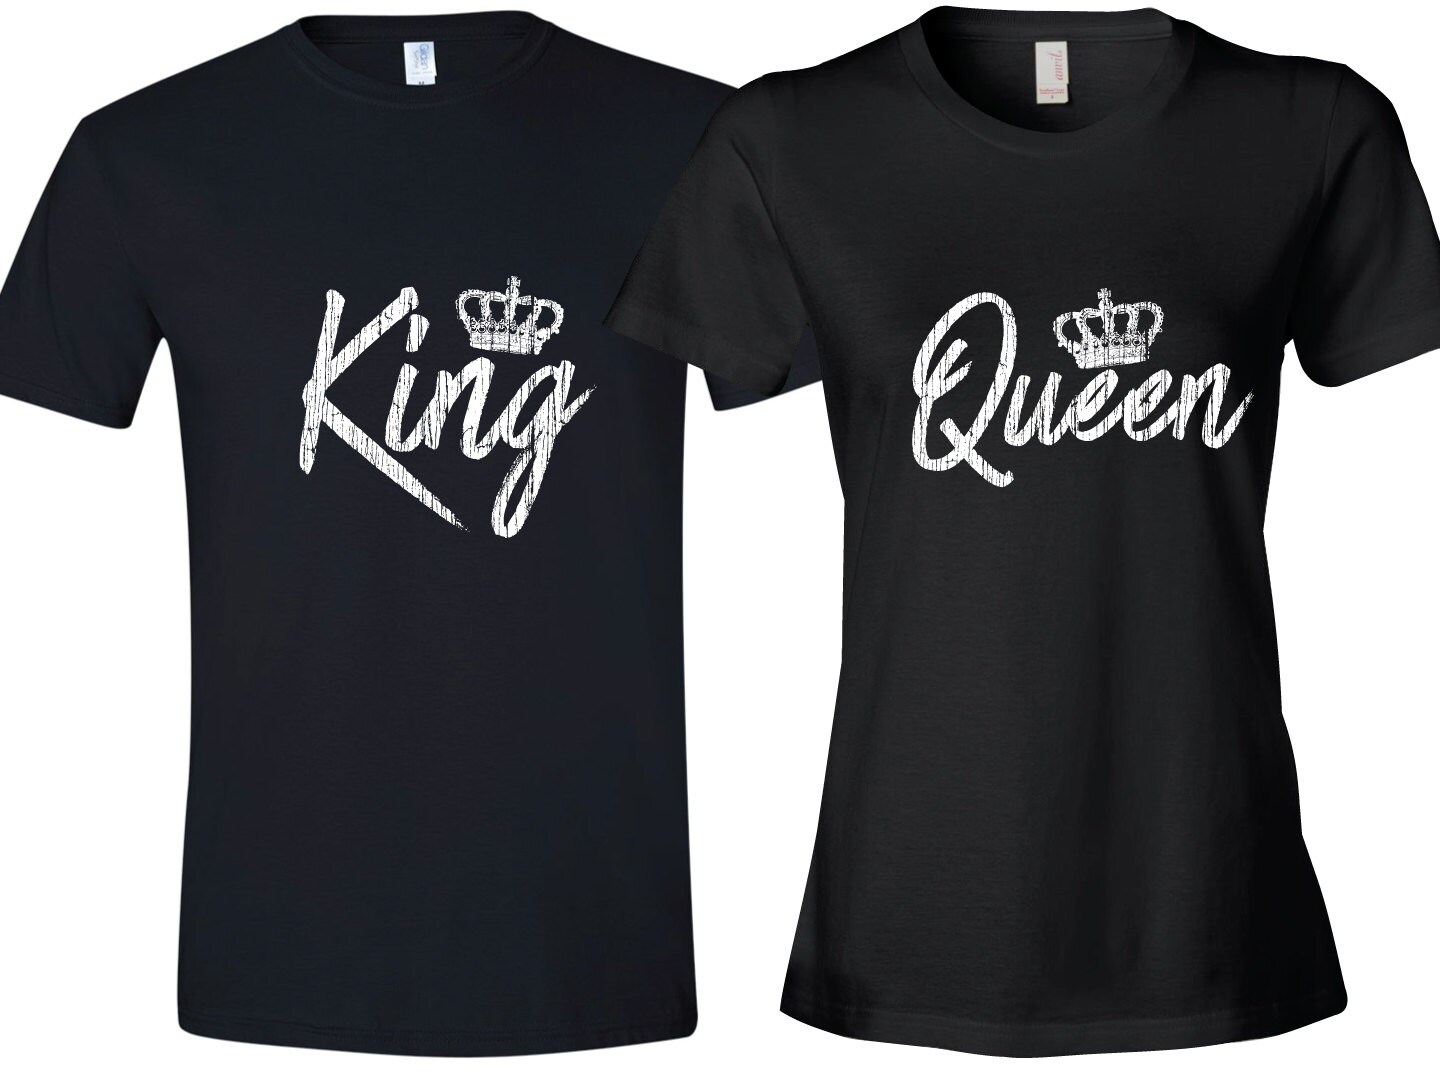 Real king queen couple t shirt beach monthly box, Om t shirts online shopping, plus size cocktail dresses online australia. 